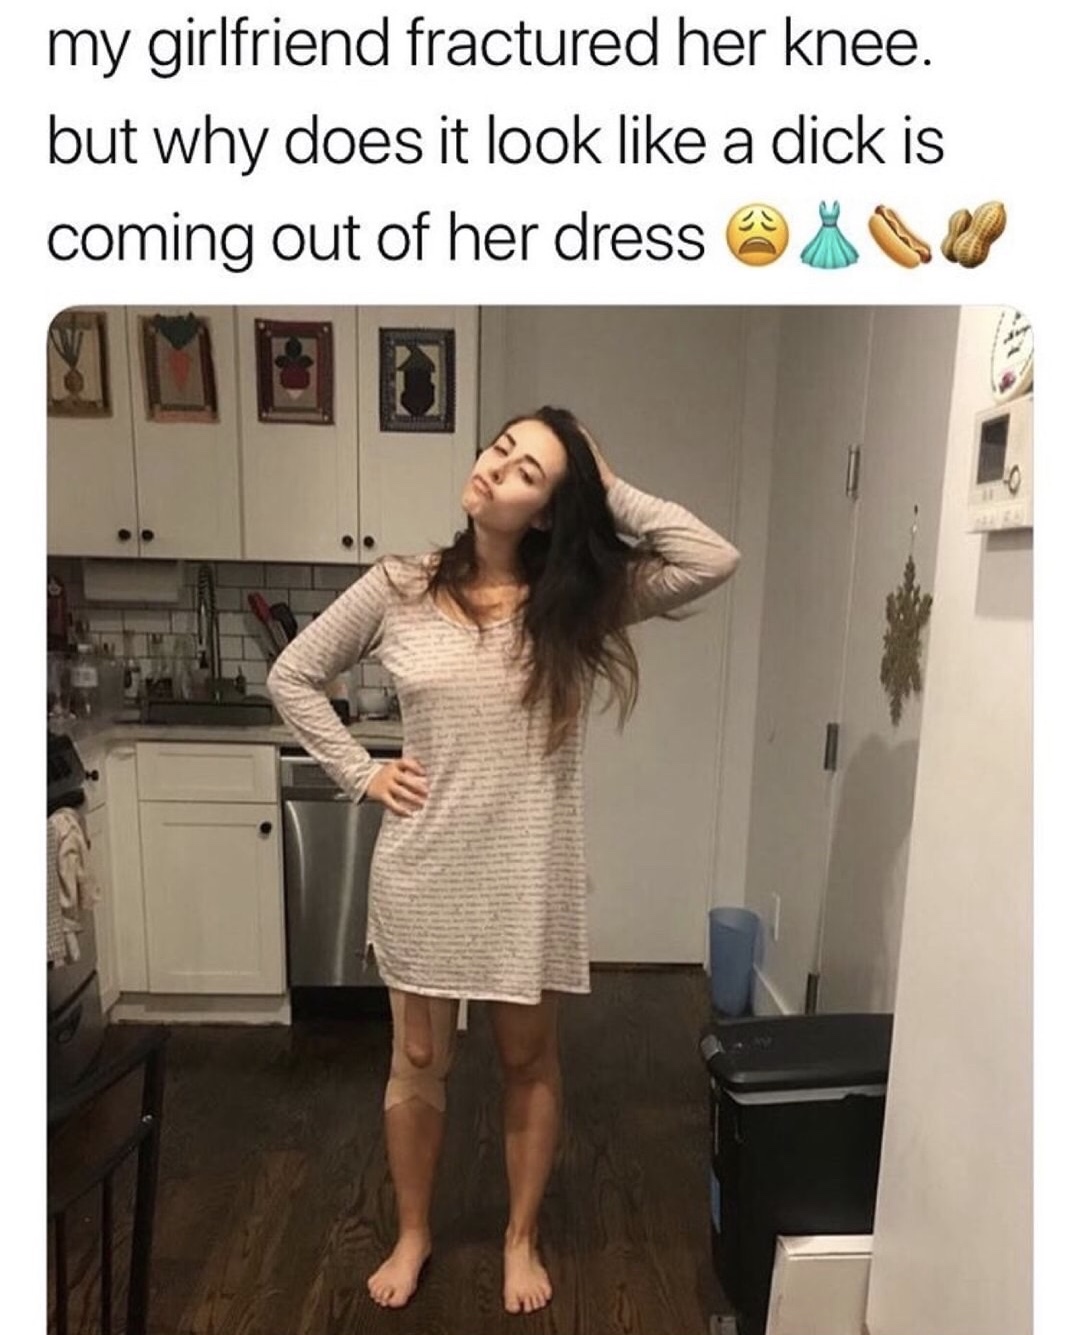 memes - giant dong - my girlfriend fractured her knee. but why does it look a dick is coming out of her dress @ U